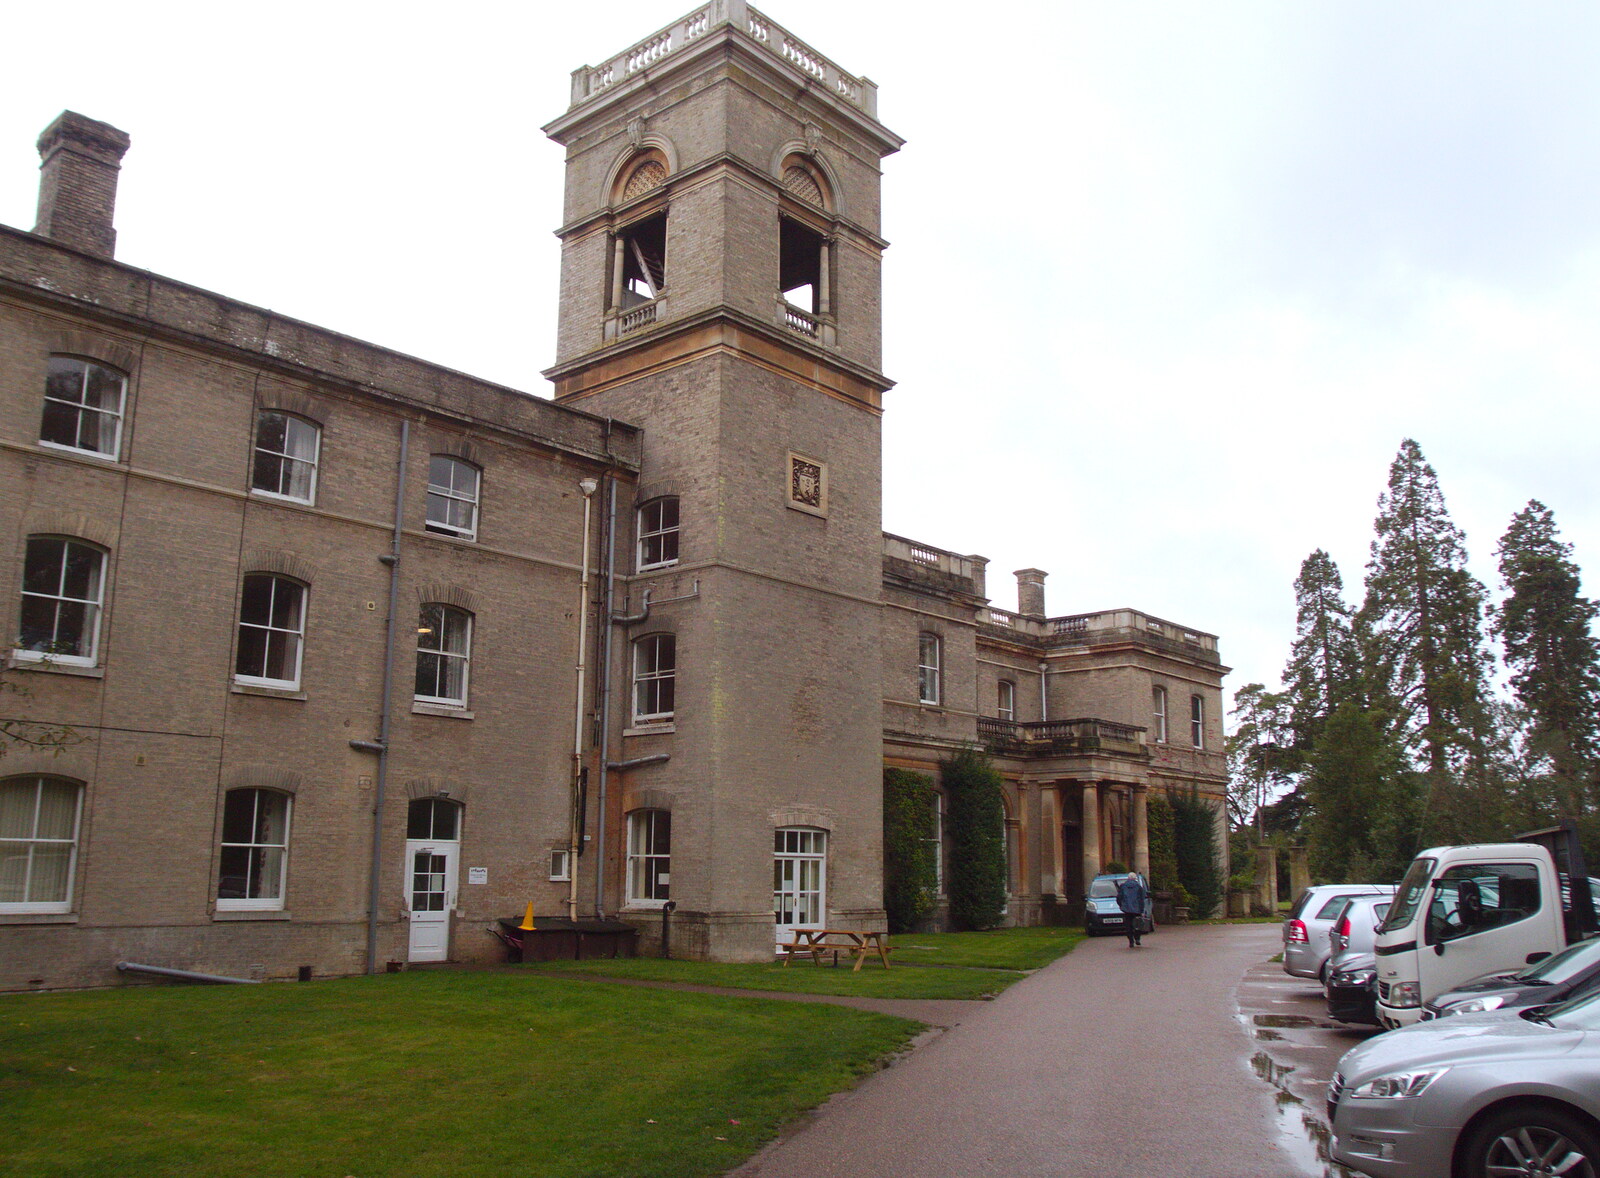 Stowlangtoft Hall in Suffolk from The GSB at Stowlangtoft, Beavers, and More XR Rebellions, Suffolk, Norfolk and London - 16th October 2019